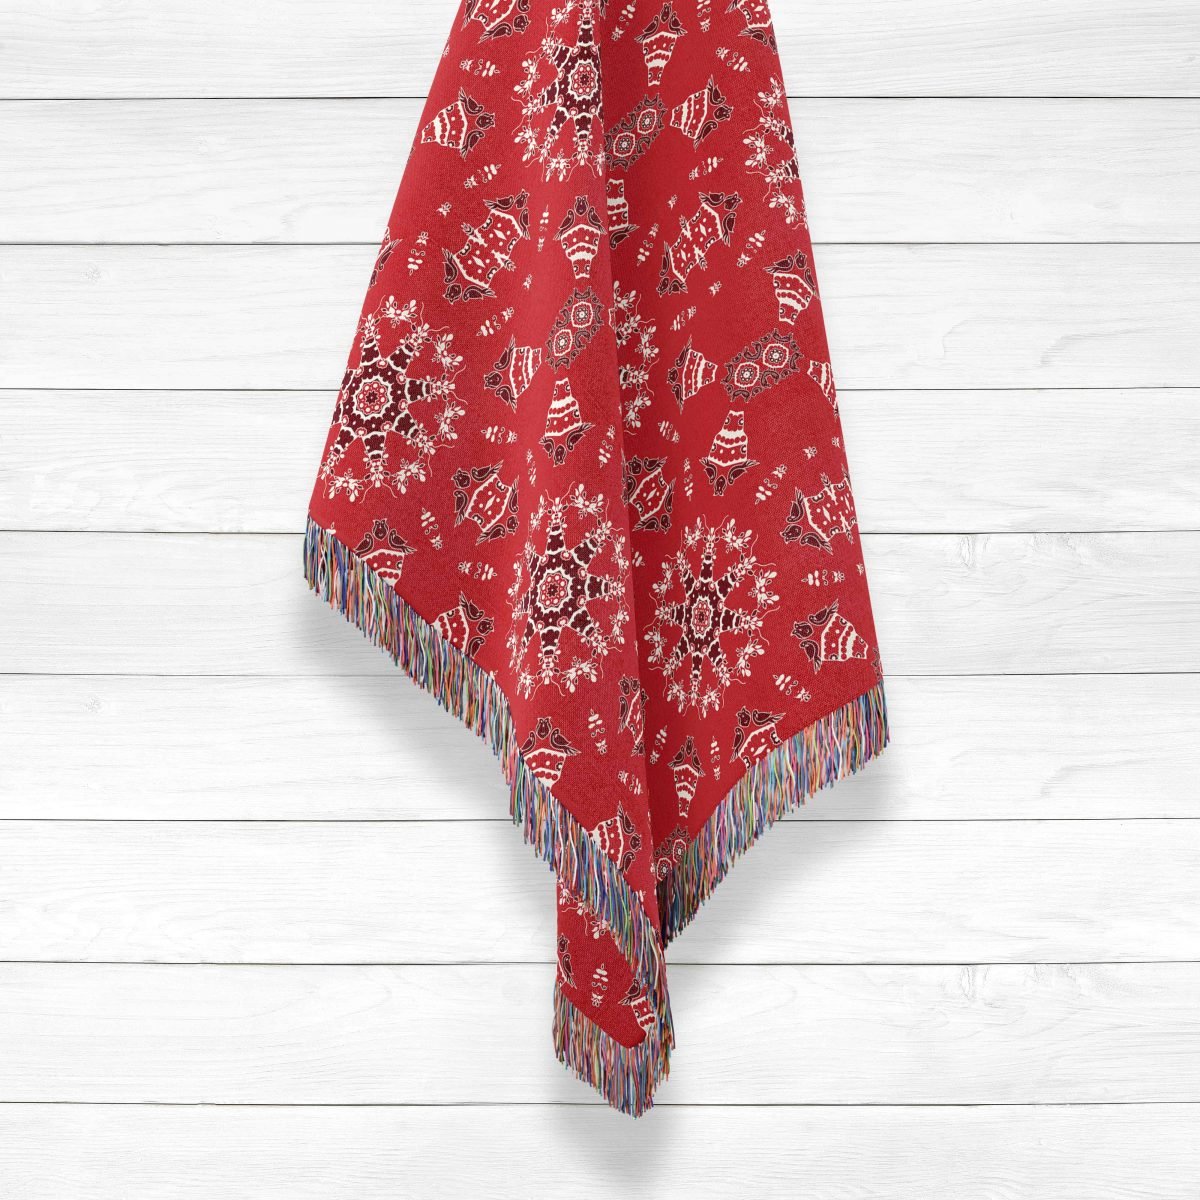 Floating Birds and Snowflakes White on Red Hanging